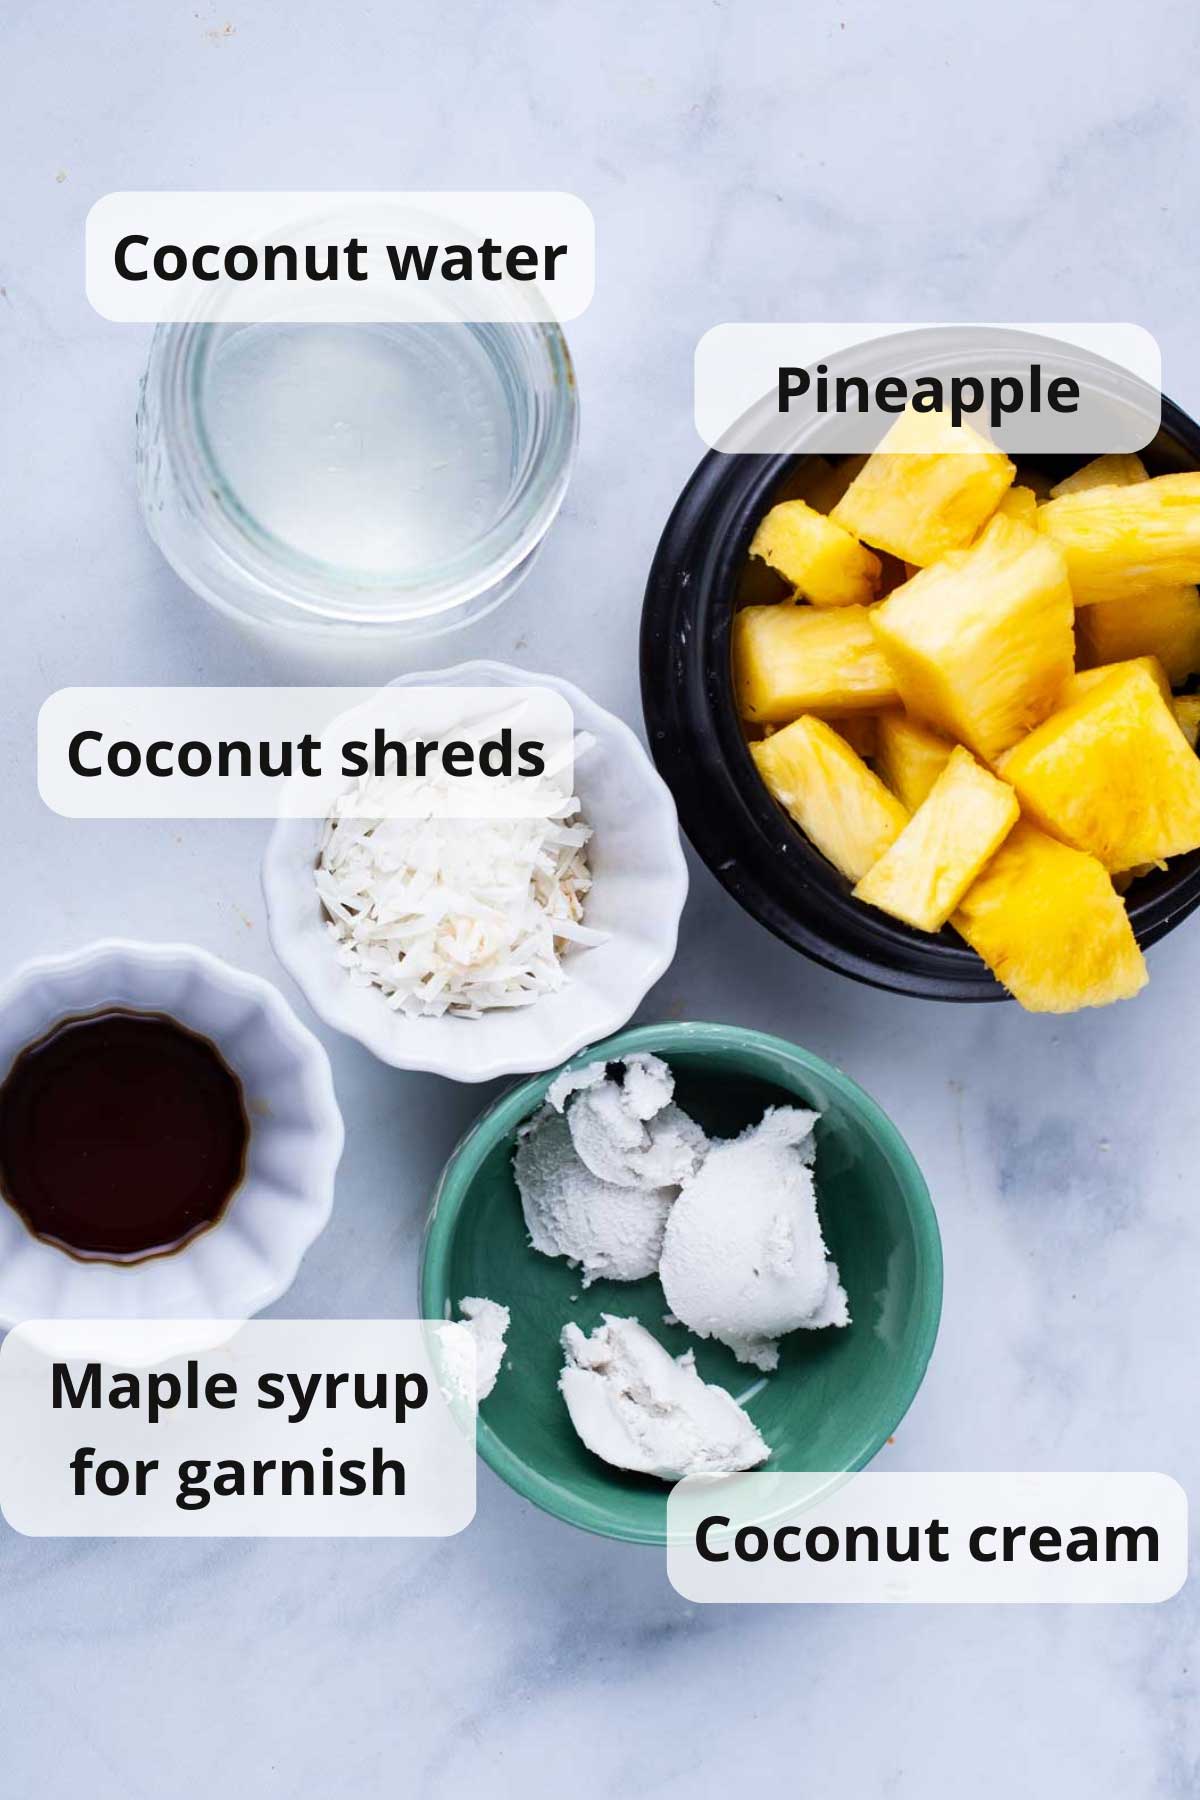 Fresh pineapple, coconut cream, coconut water, fine coconut shreds, and maple syrup displayed on a table.